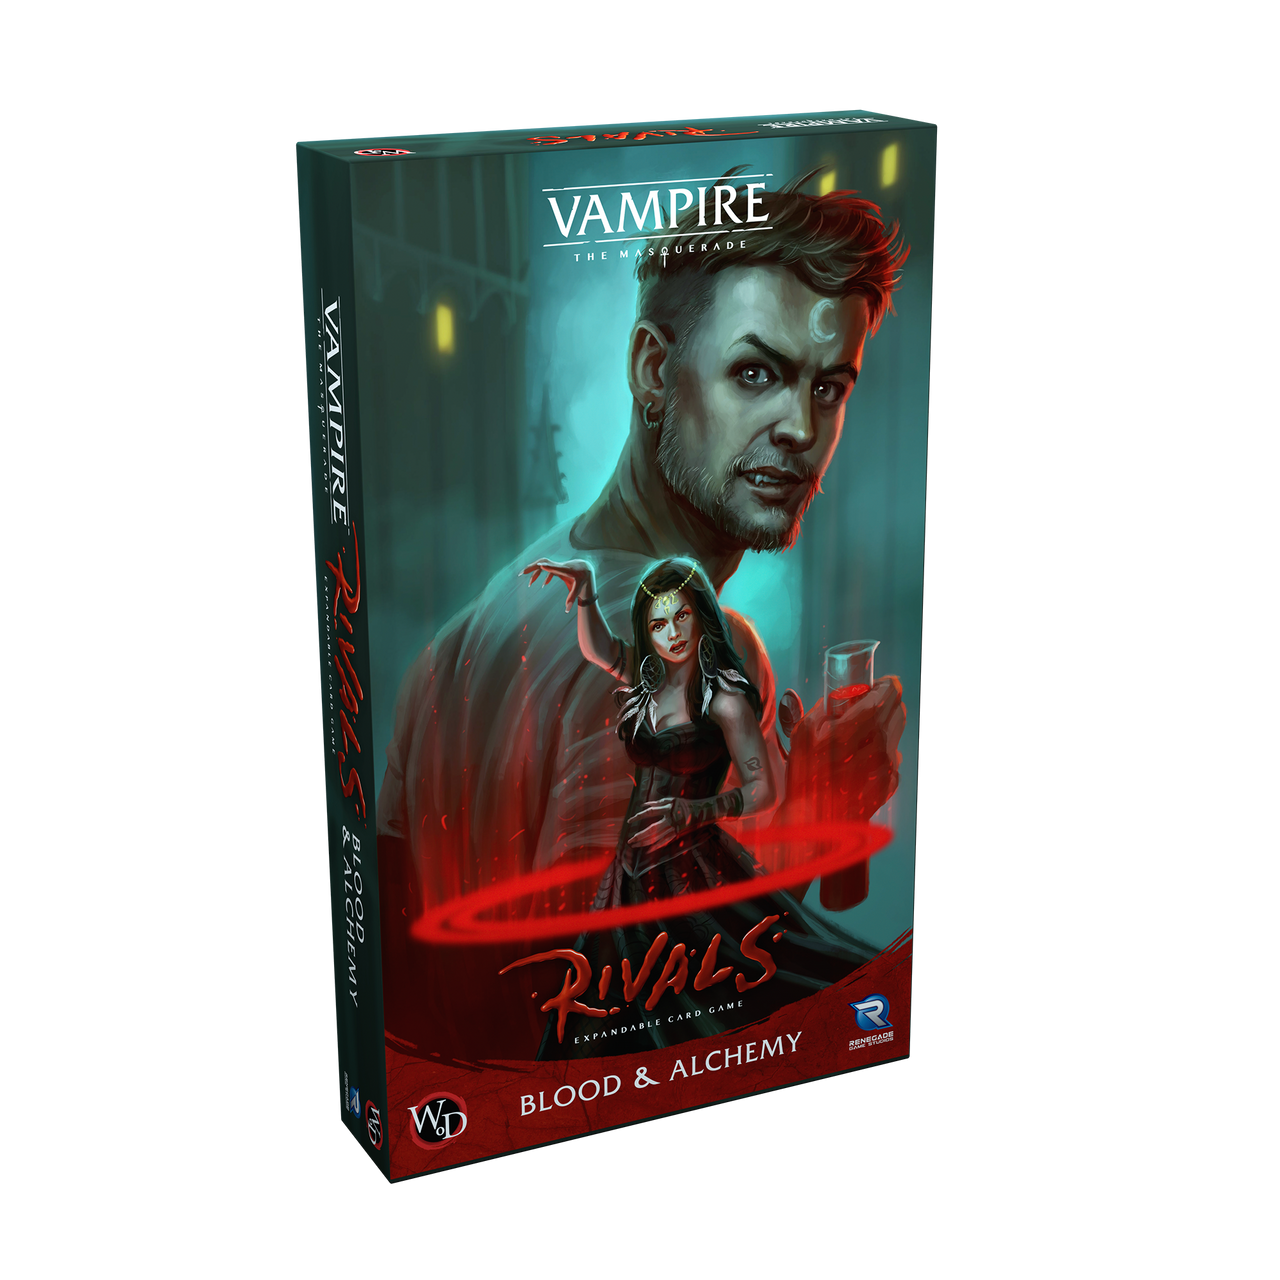 Vampire: The Masquerade — Out for Blood